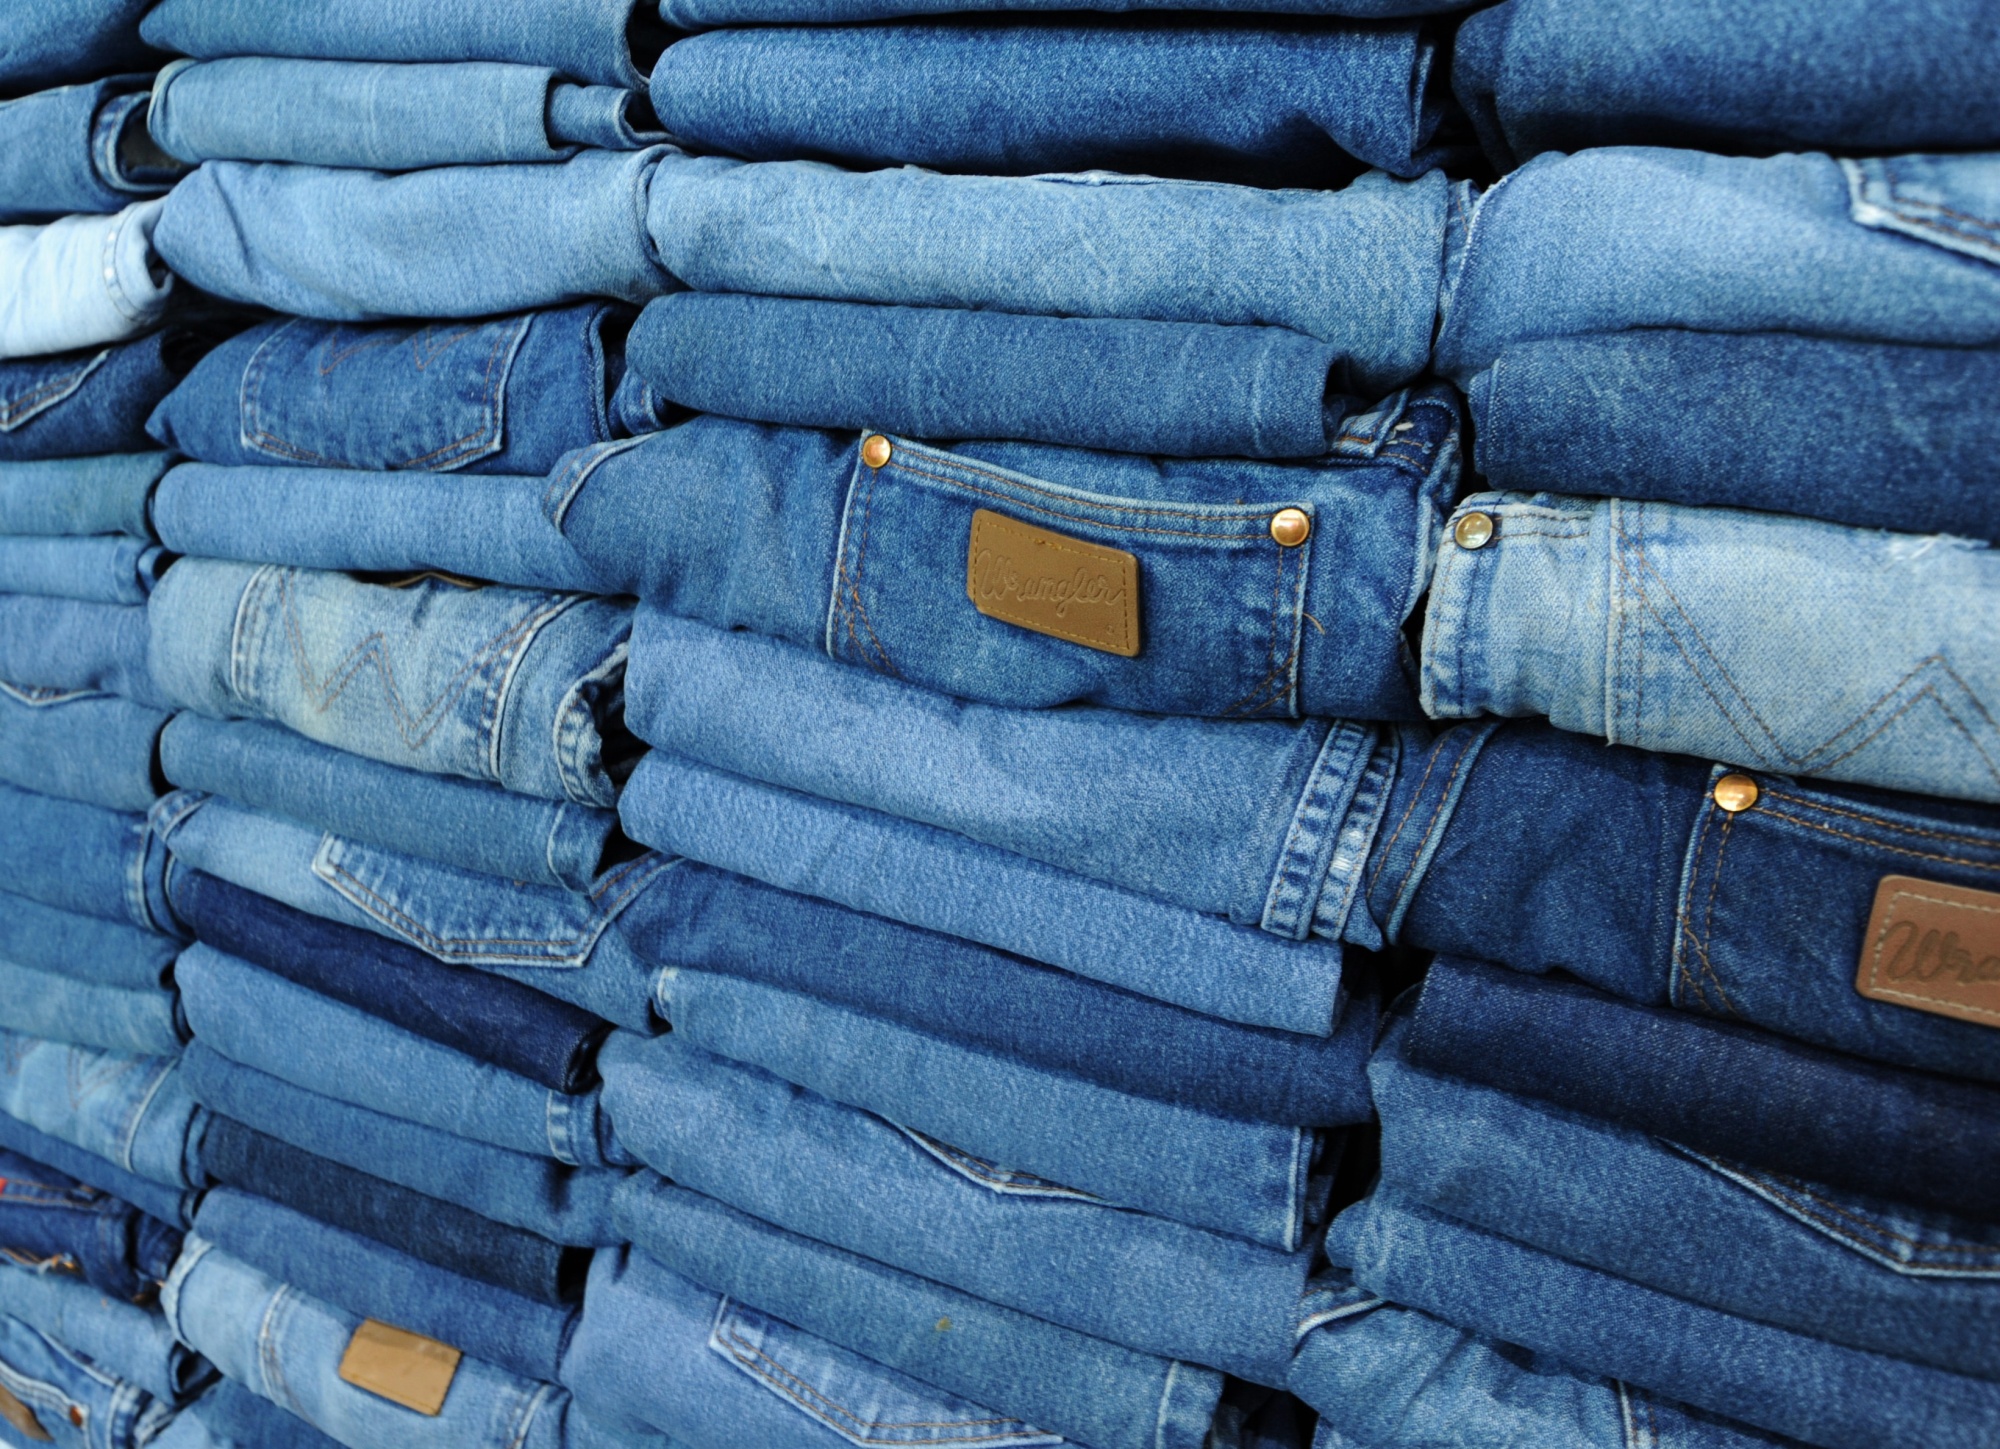 Branded jeans,Wholesale Jeans Market,Denim Jeans,Cheap Jeans,Factory,Cheap  price,Jeans Manufacturing - YouTube